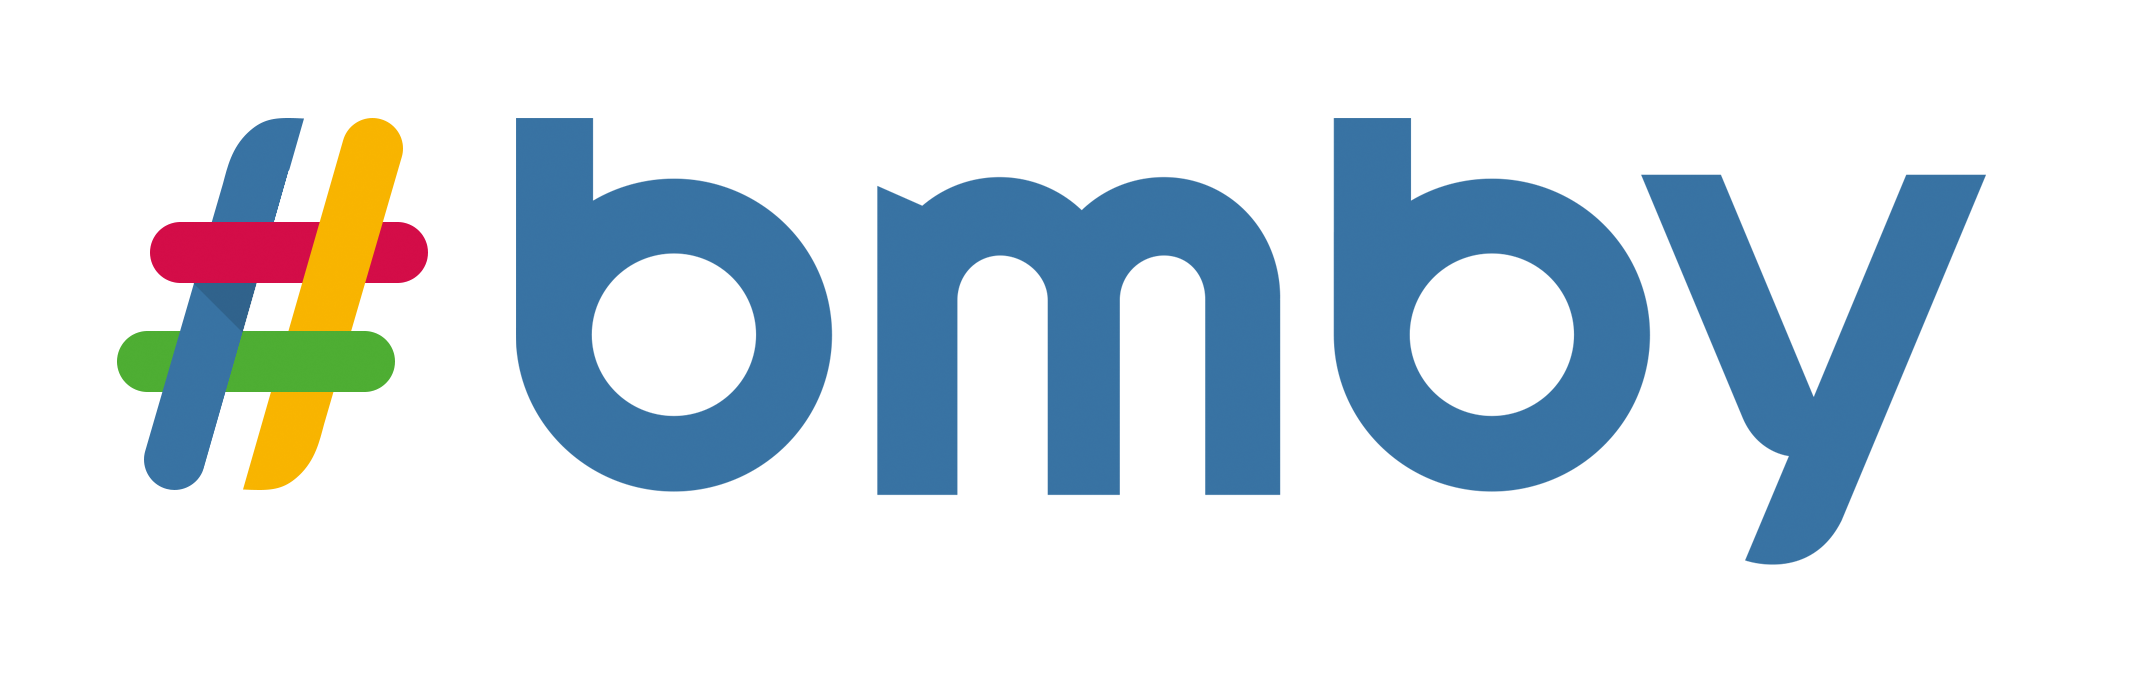 new bmby logo.png